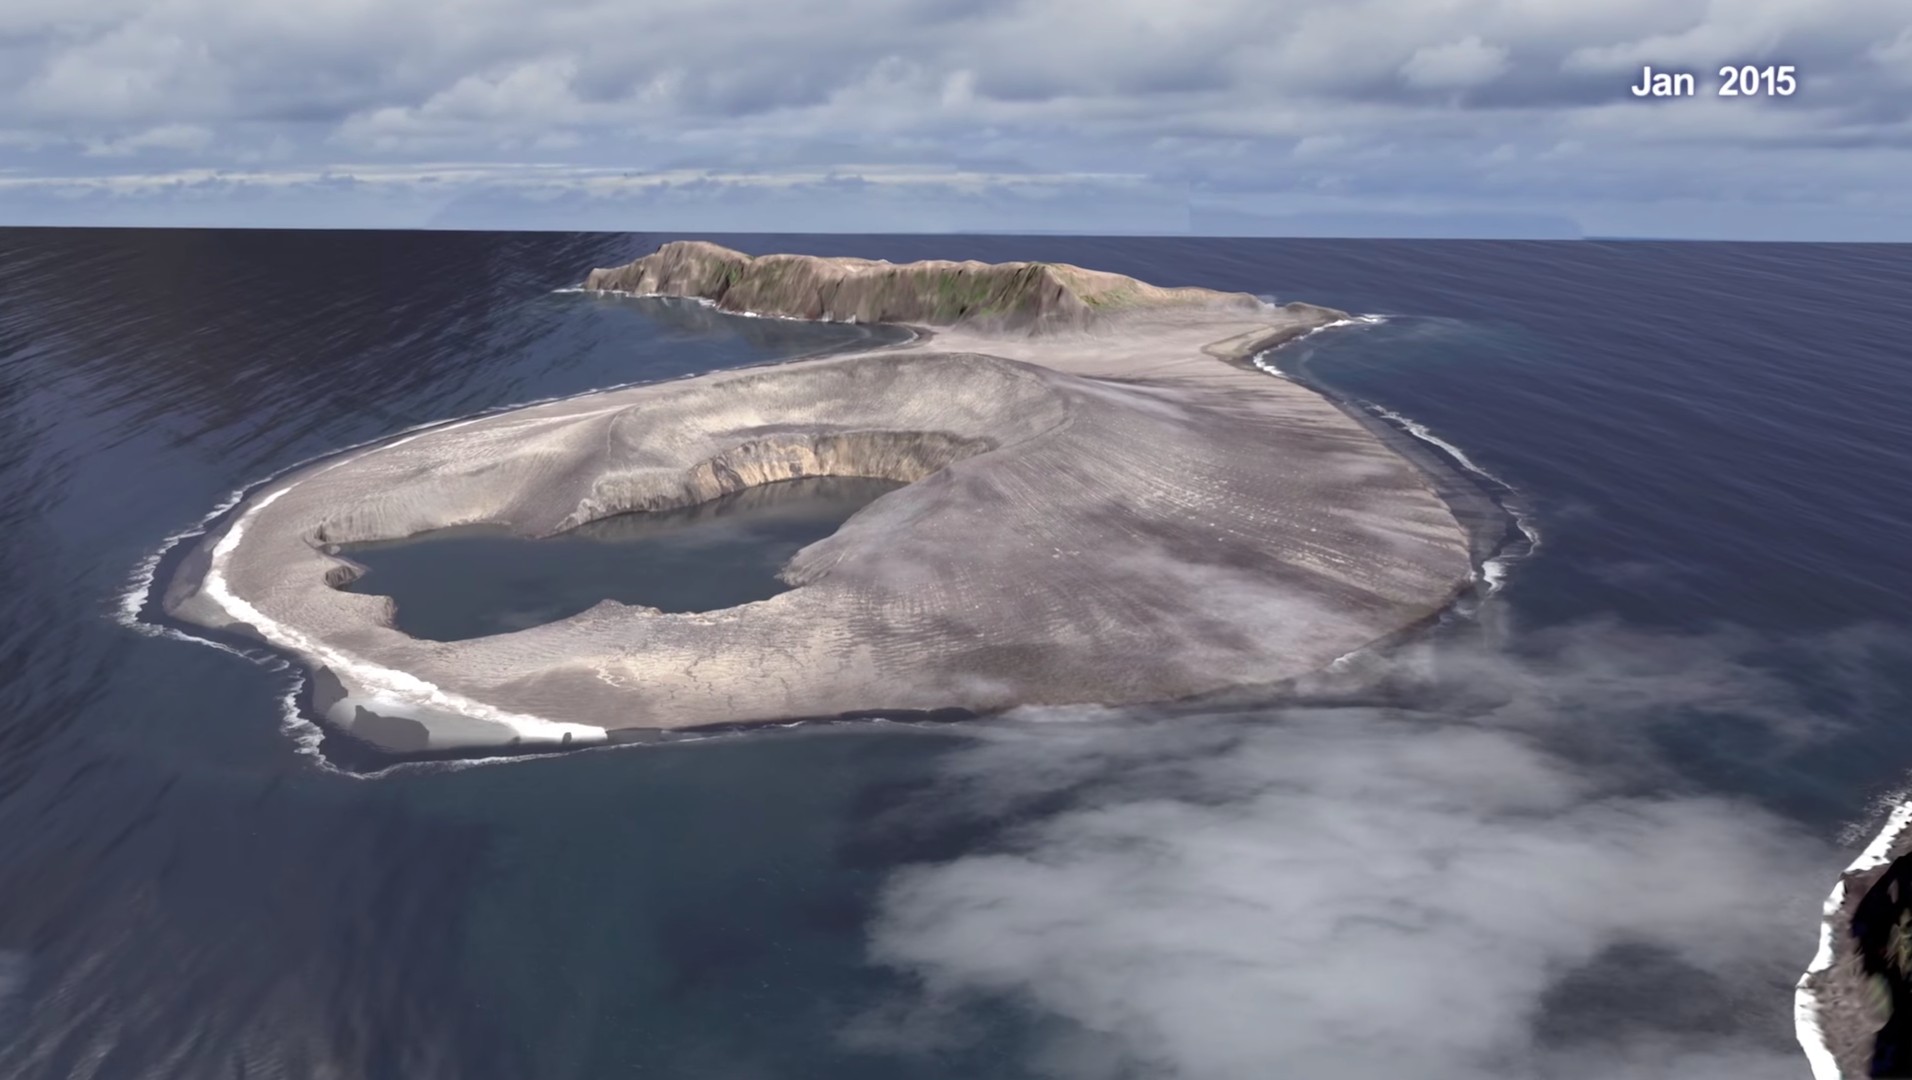 For The First Time Ever You Can Watch A Volcanic Island Being Born Vice News 